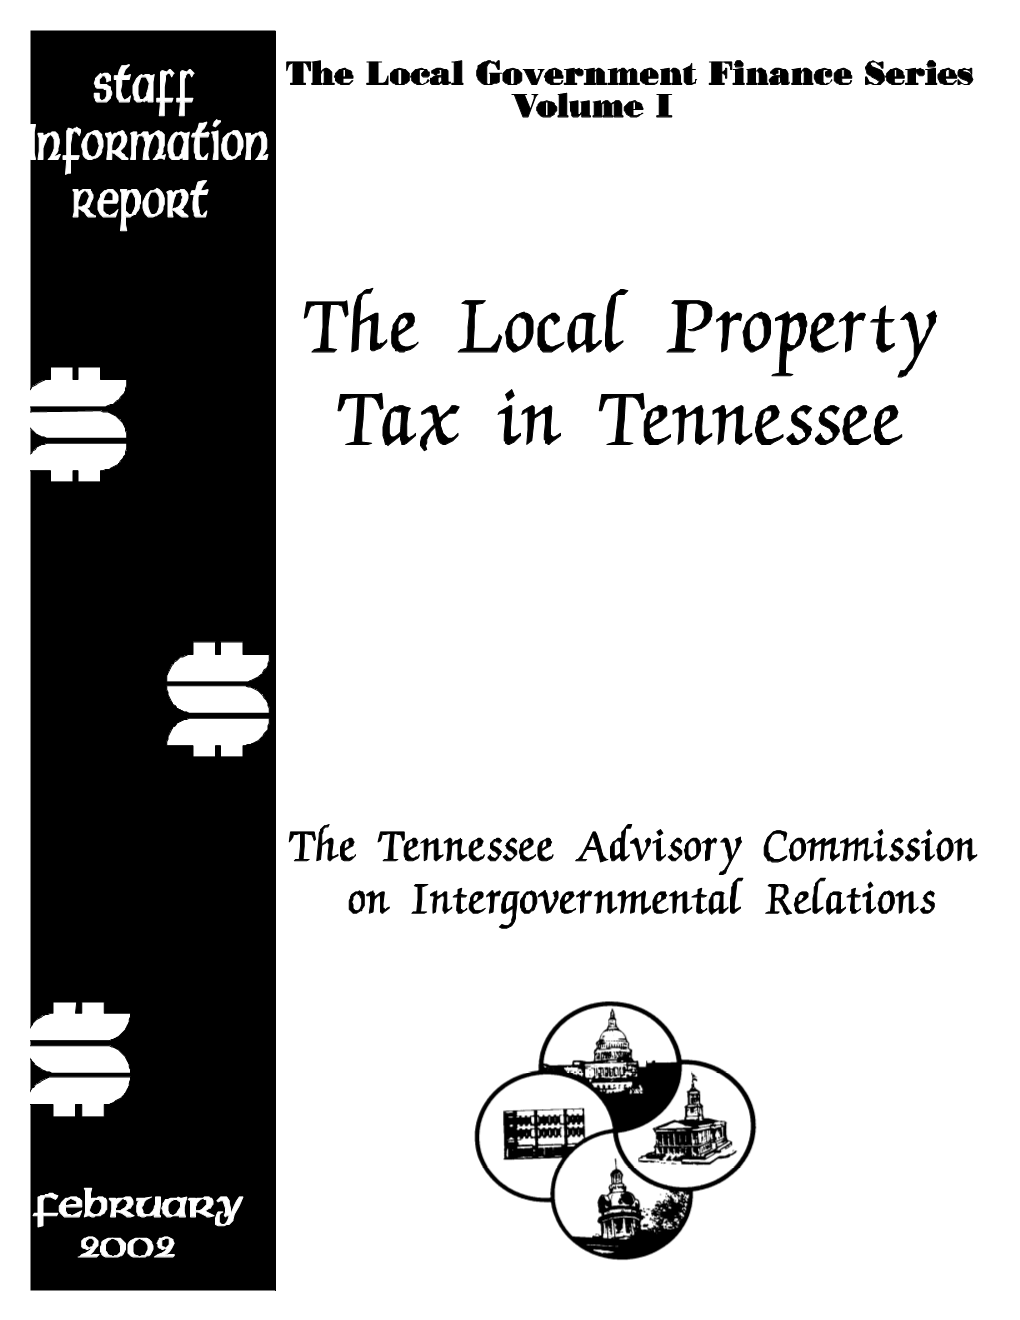 Local Property Tax in Tennessee